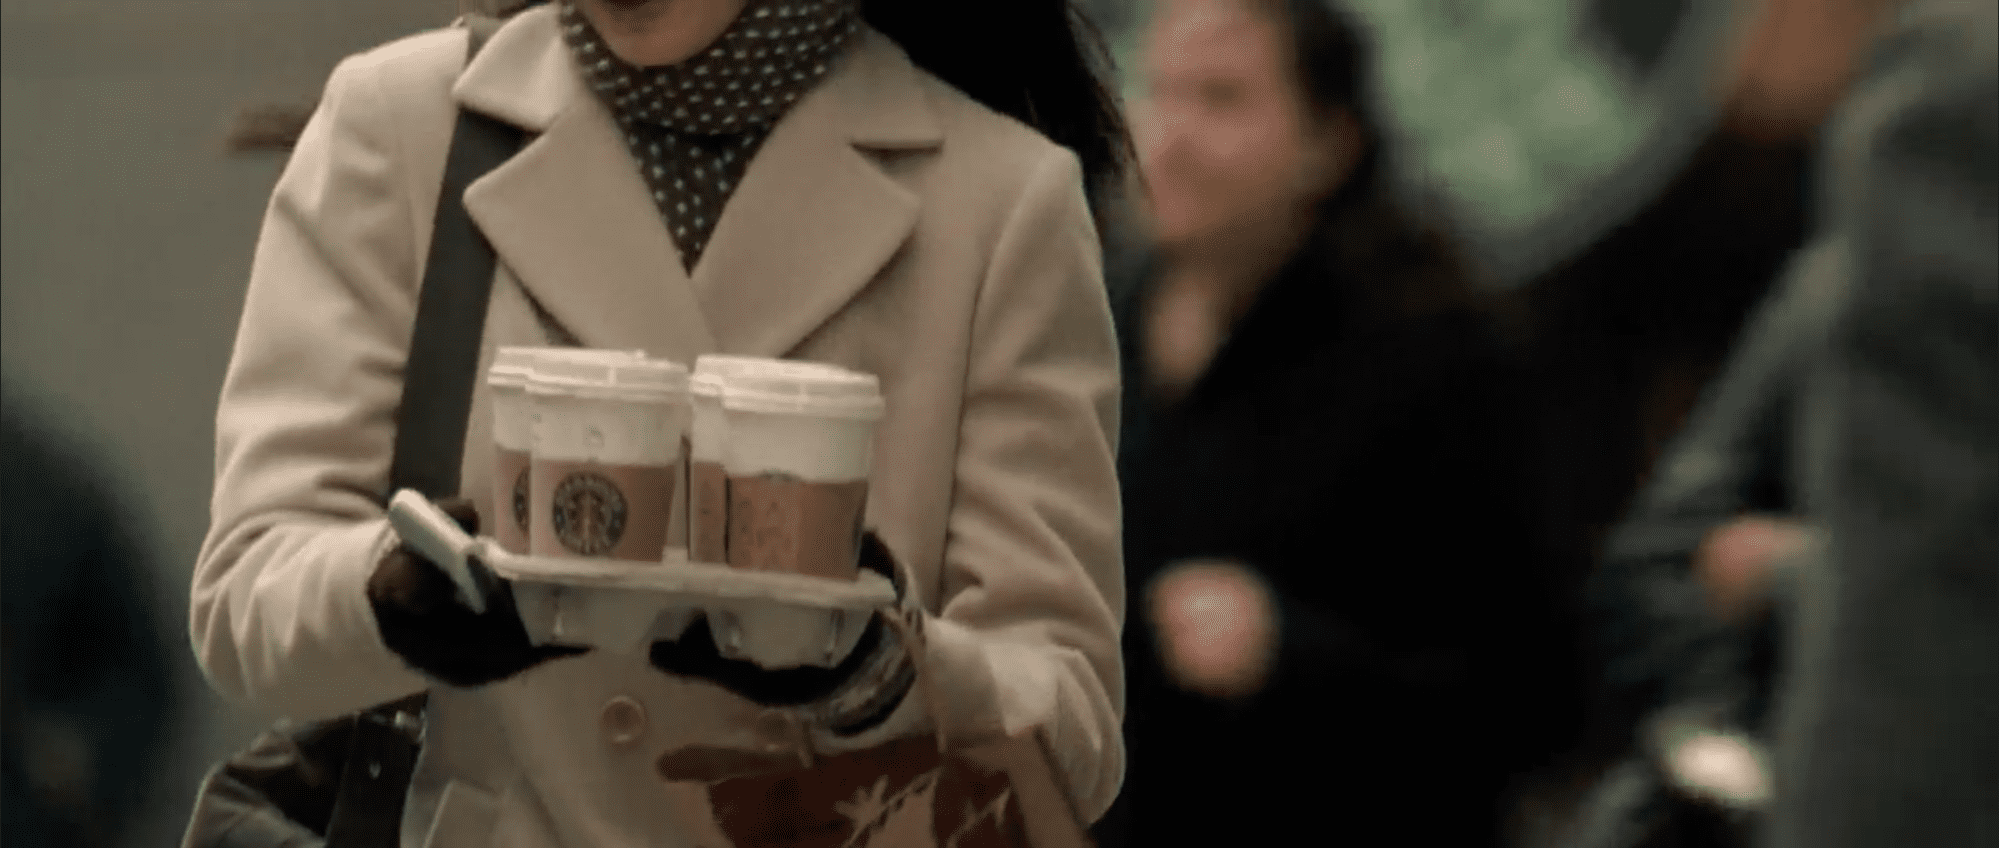 Coffee from Starbucks as product placement